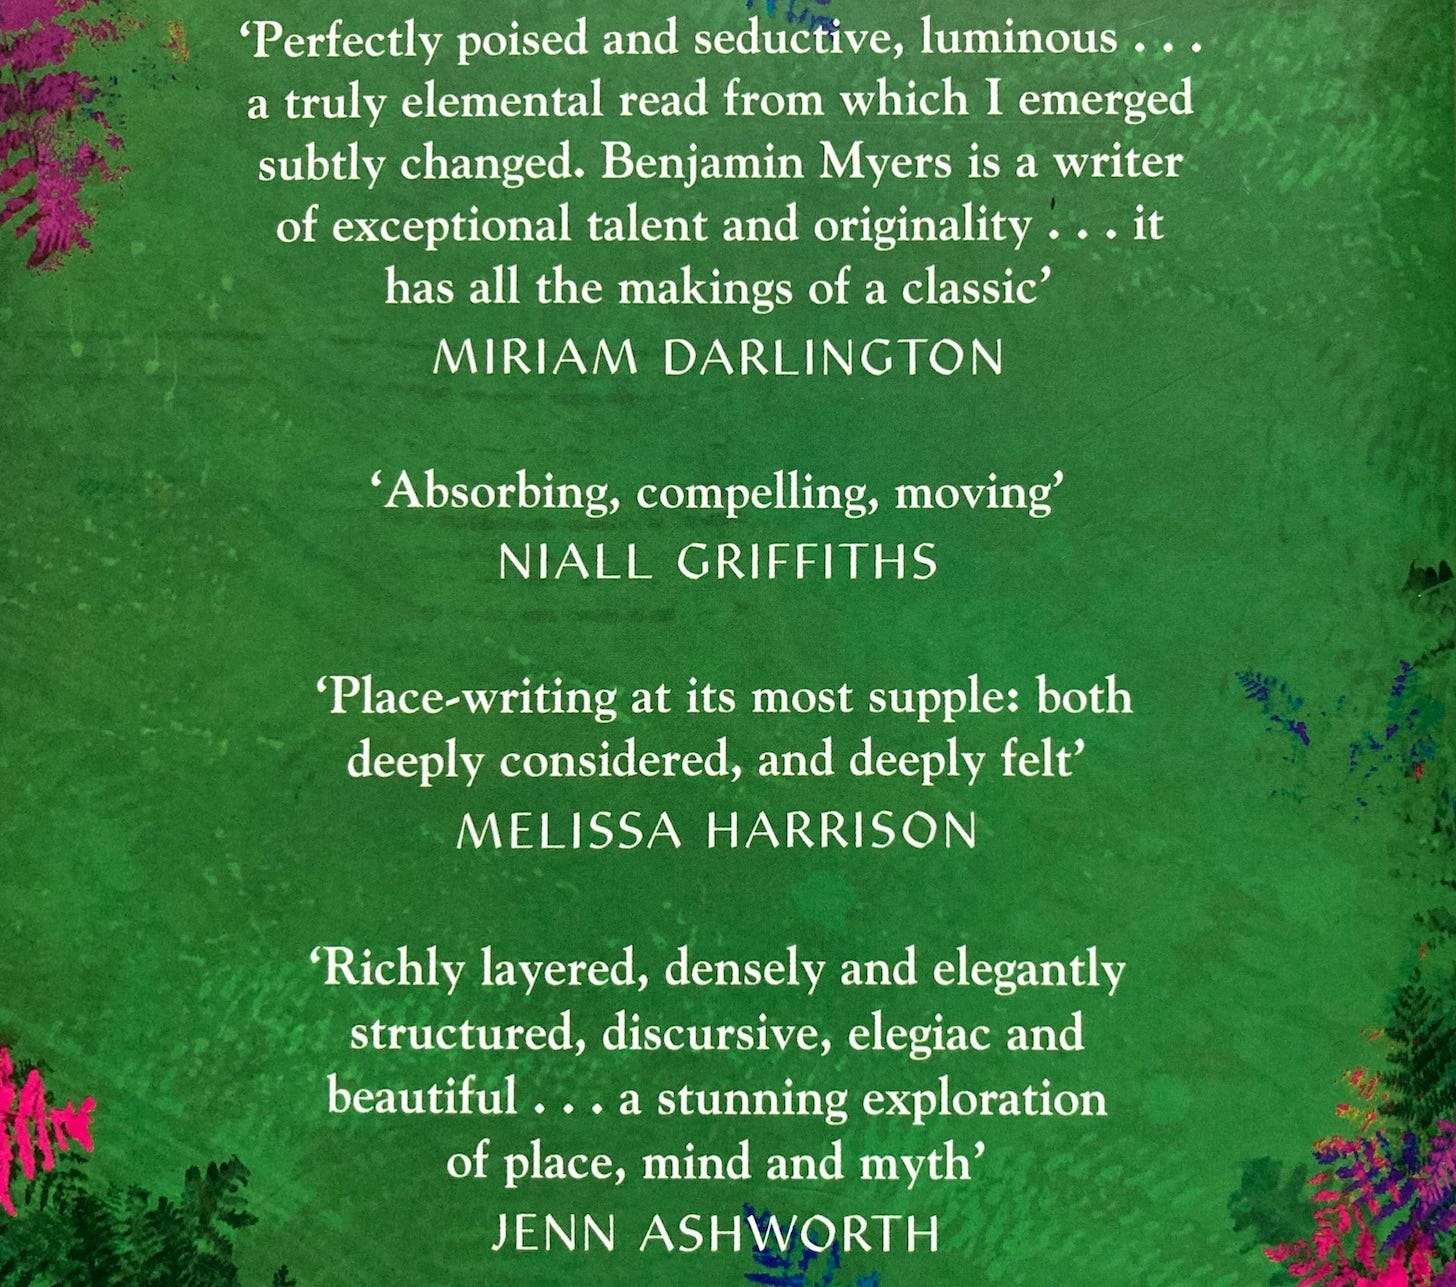 Testimonials for Under the Rock by Benjamin Myers from Miriam Darlington Niall Griffiths Melissa Harrison and Jenn Ashworth.